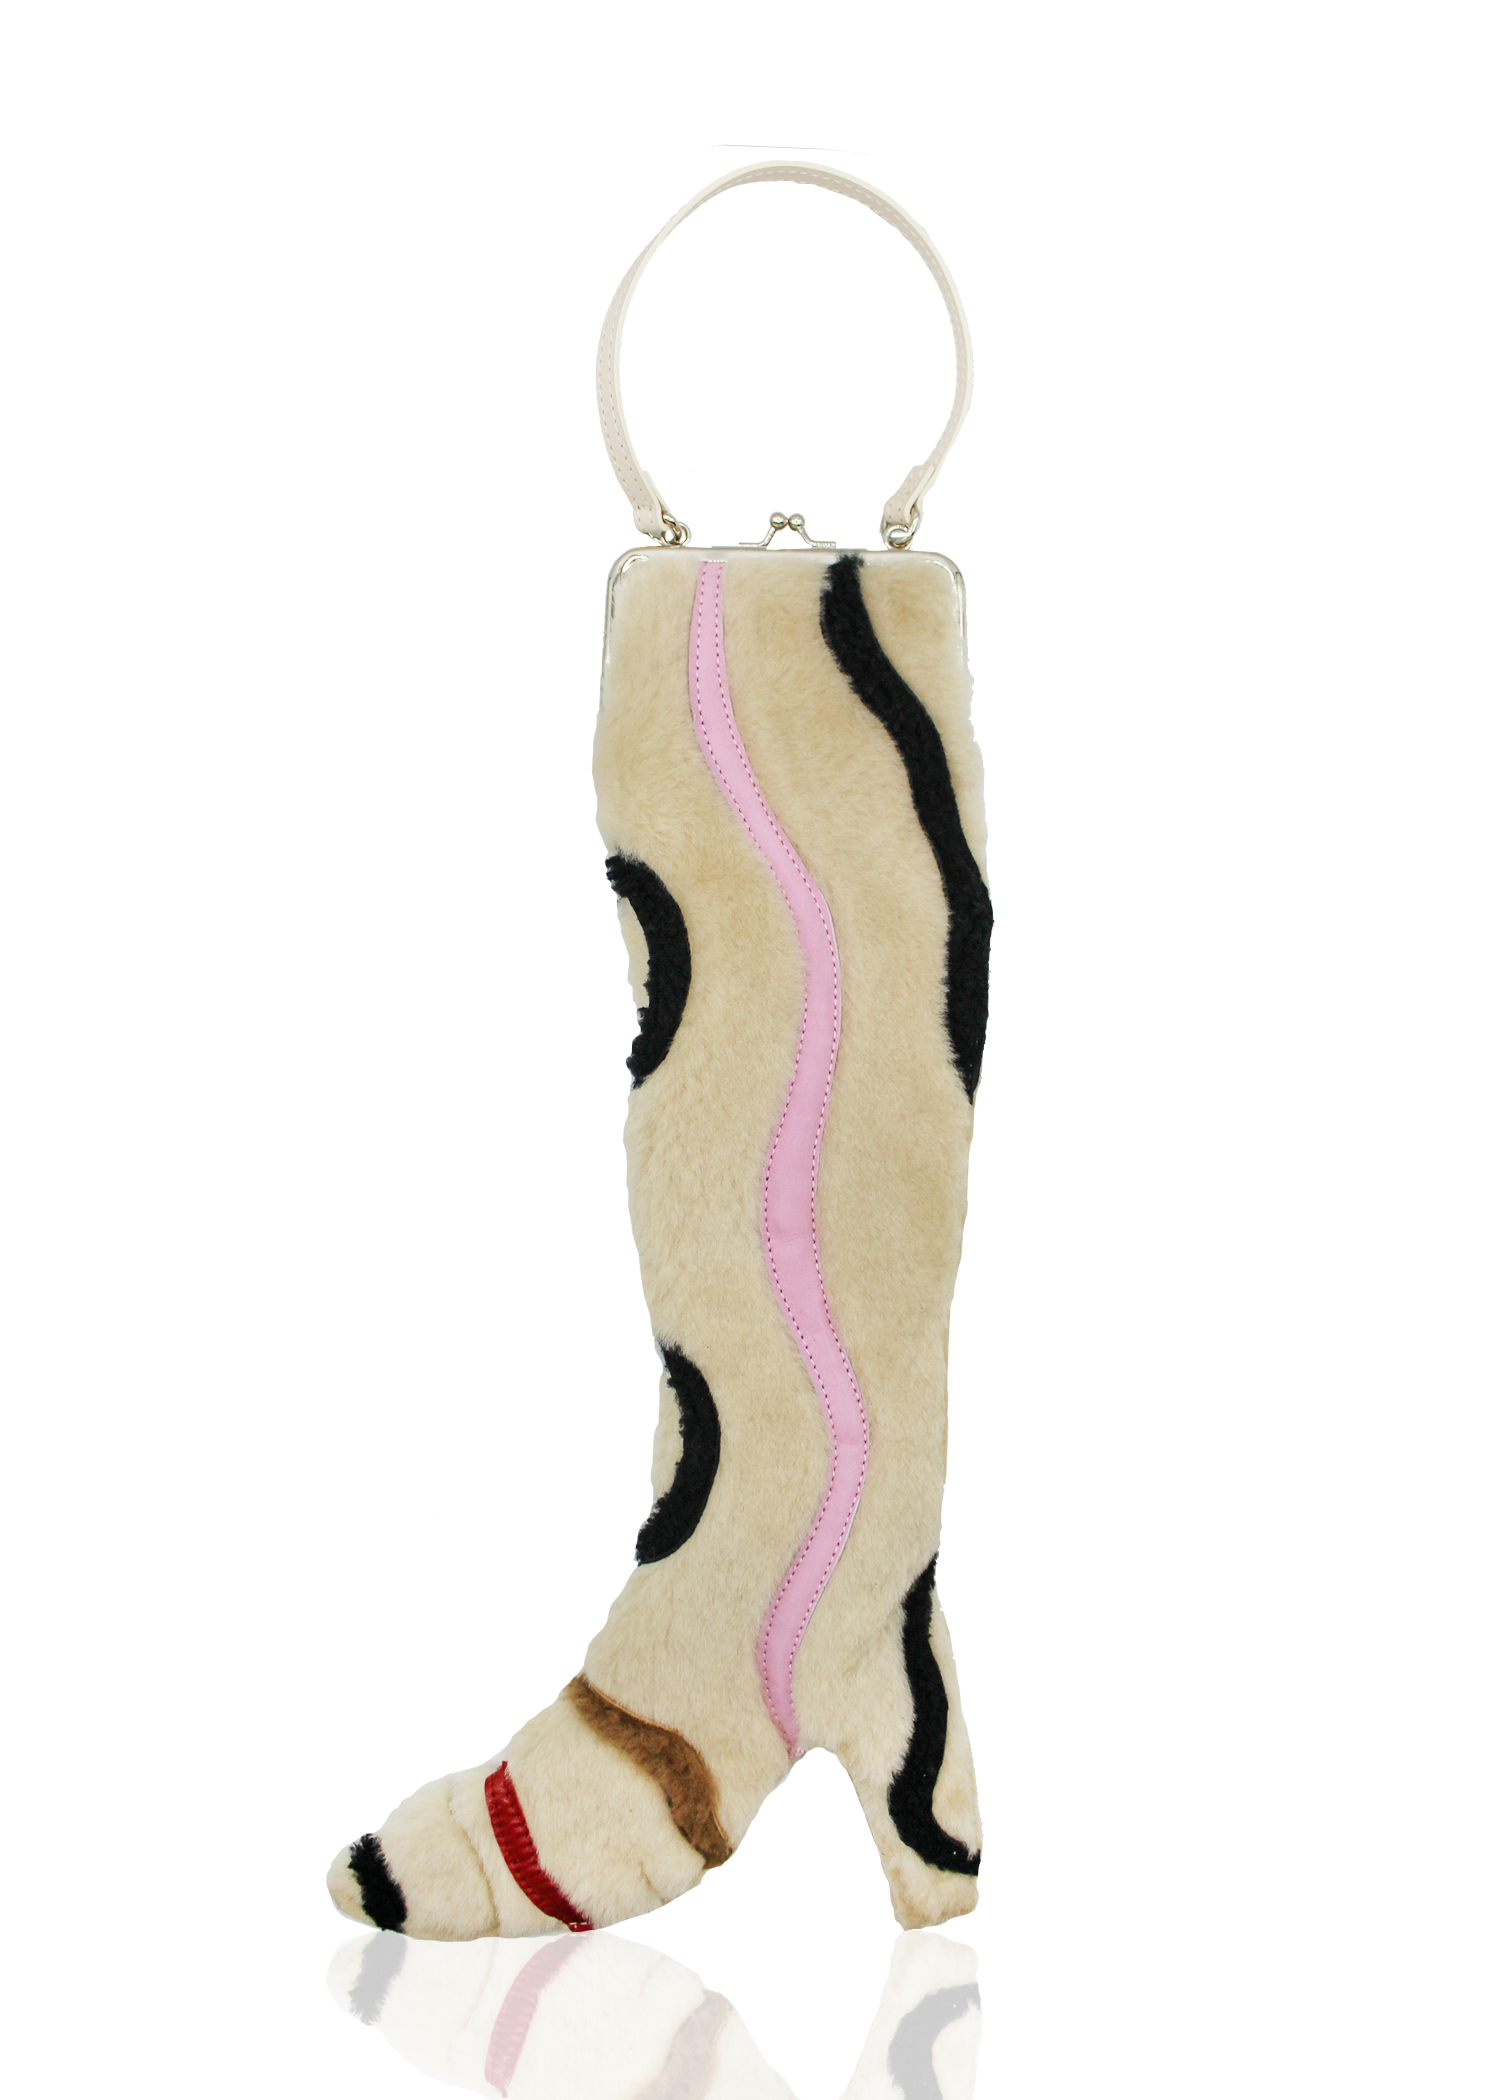 Cream shearling boot-shaped bag featuring whimsical patchworking in pink, black, brown, and red.